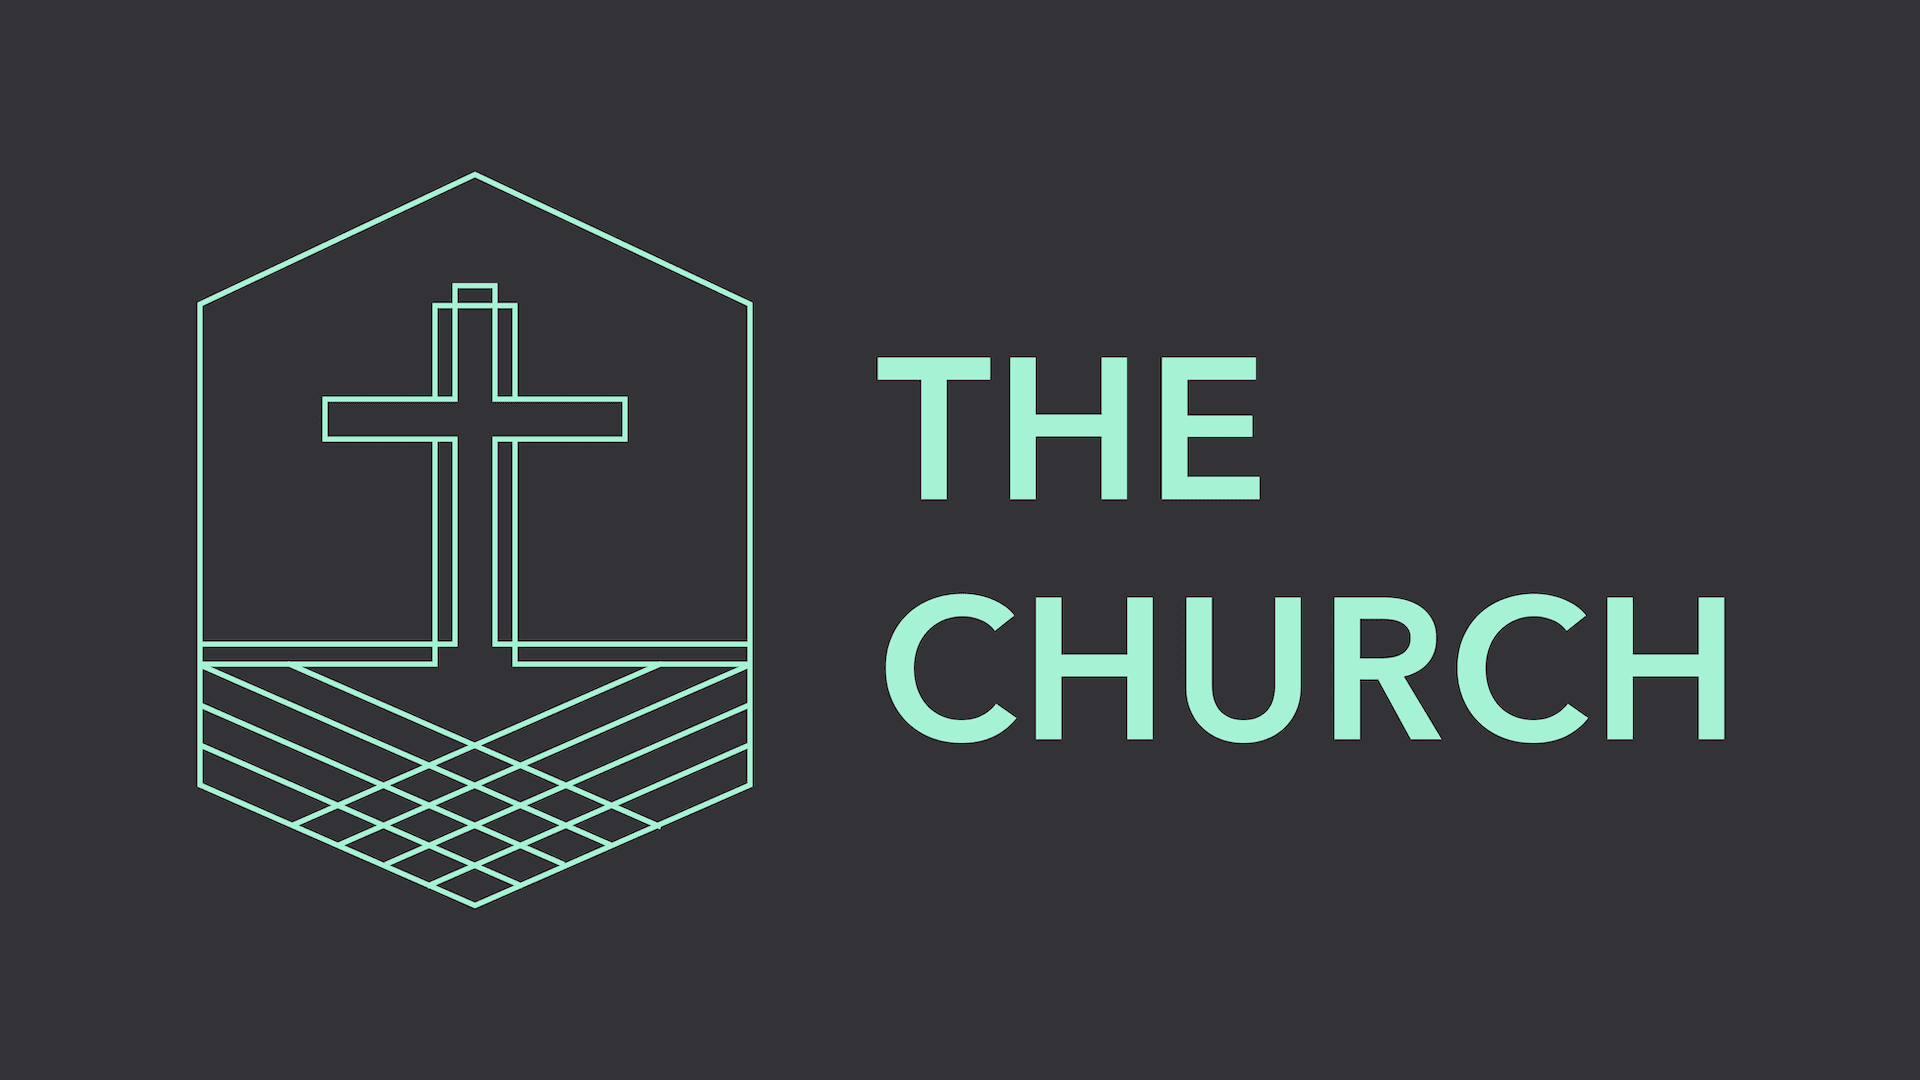 The Church graphic